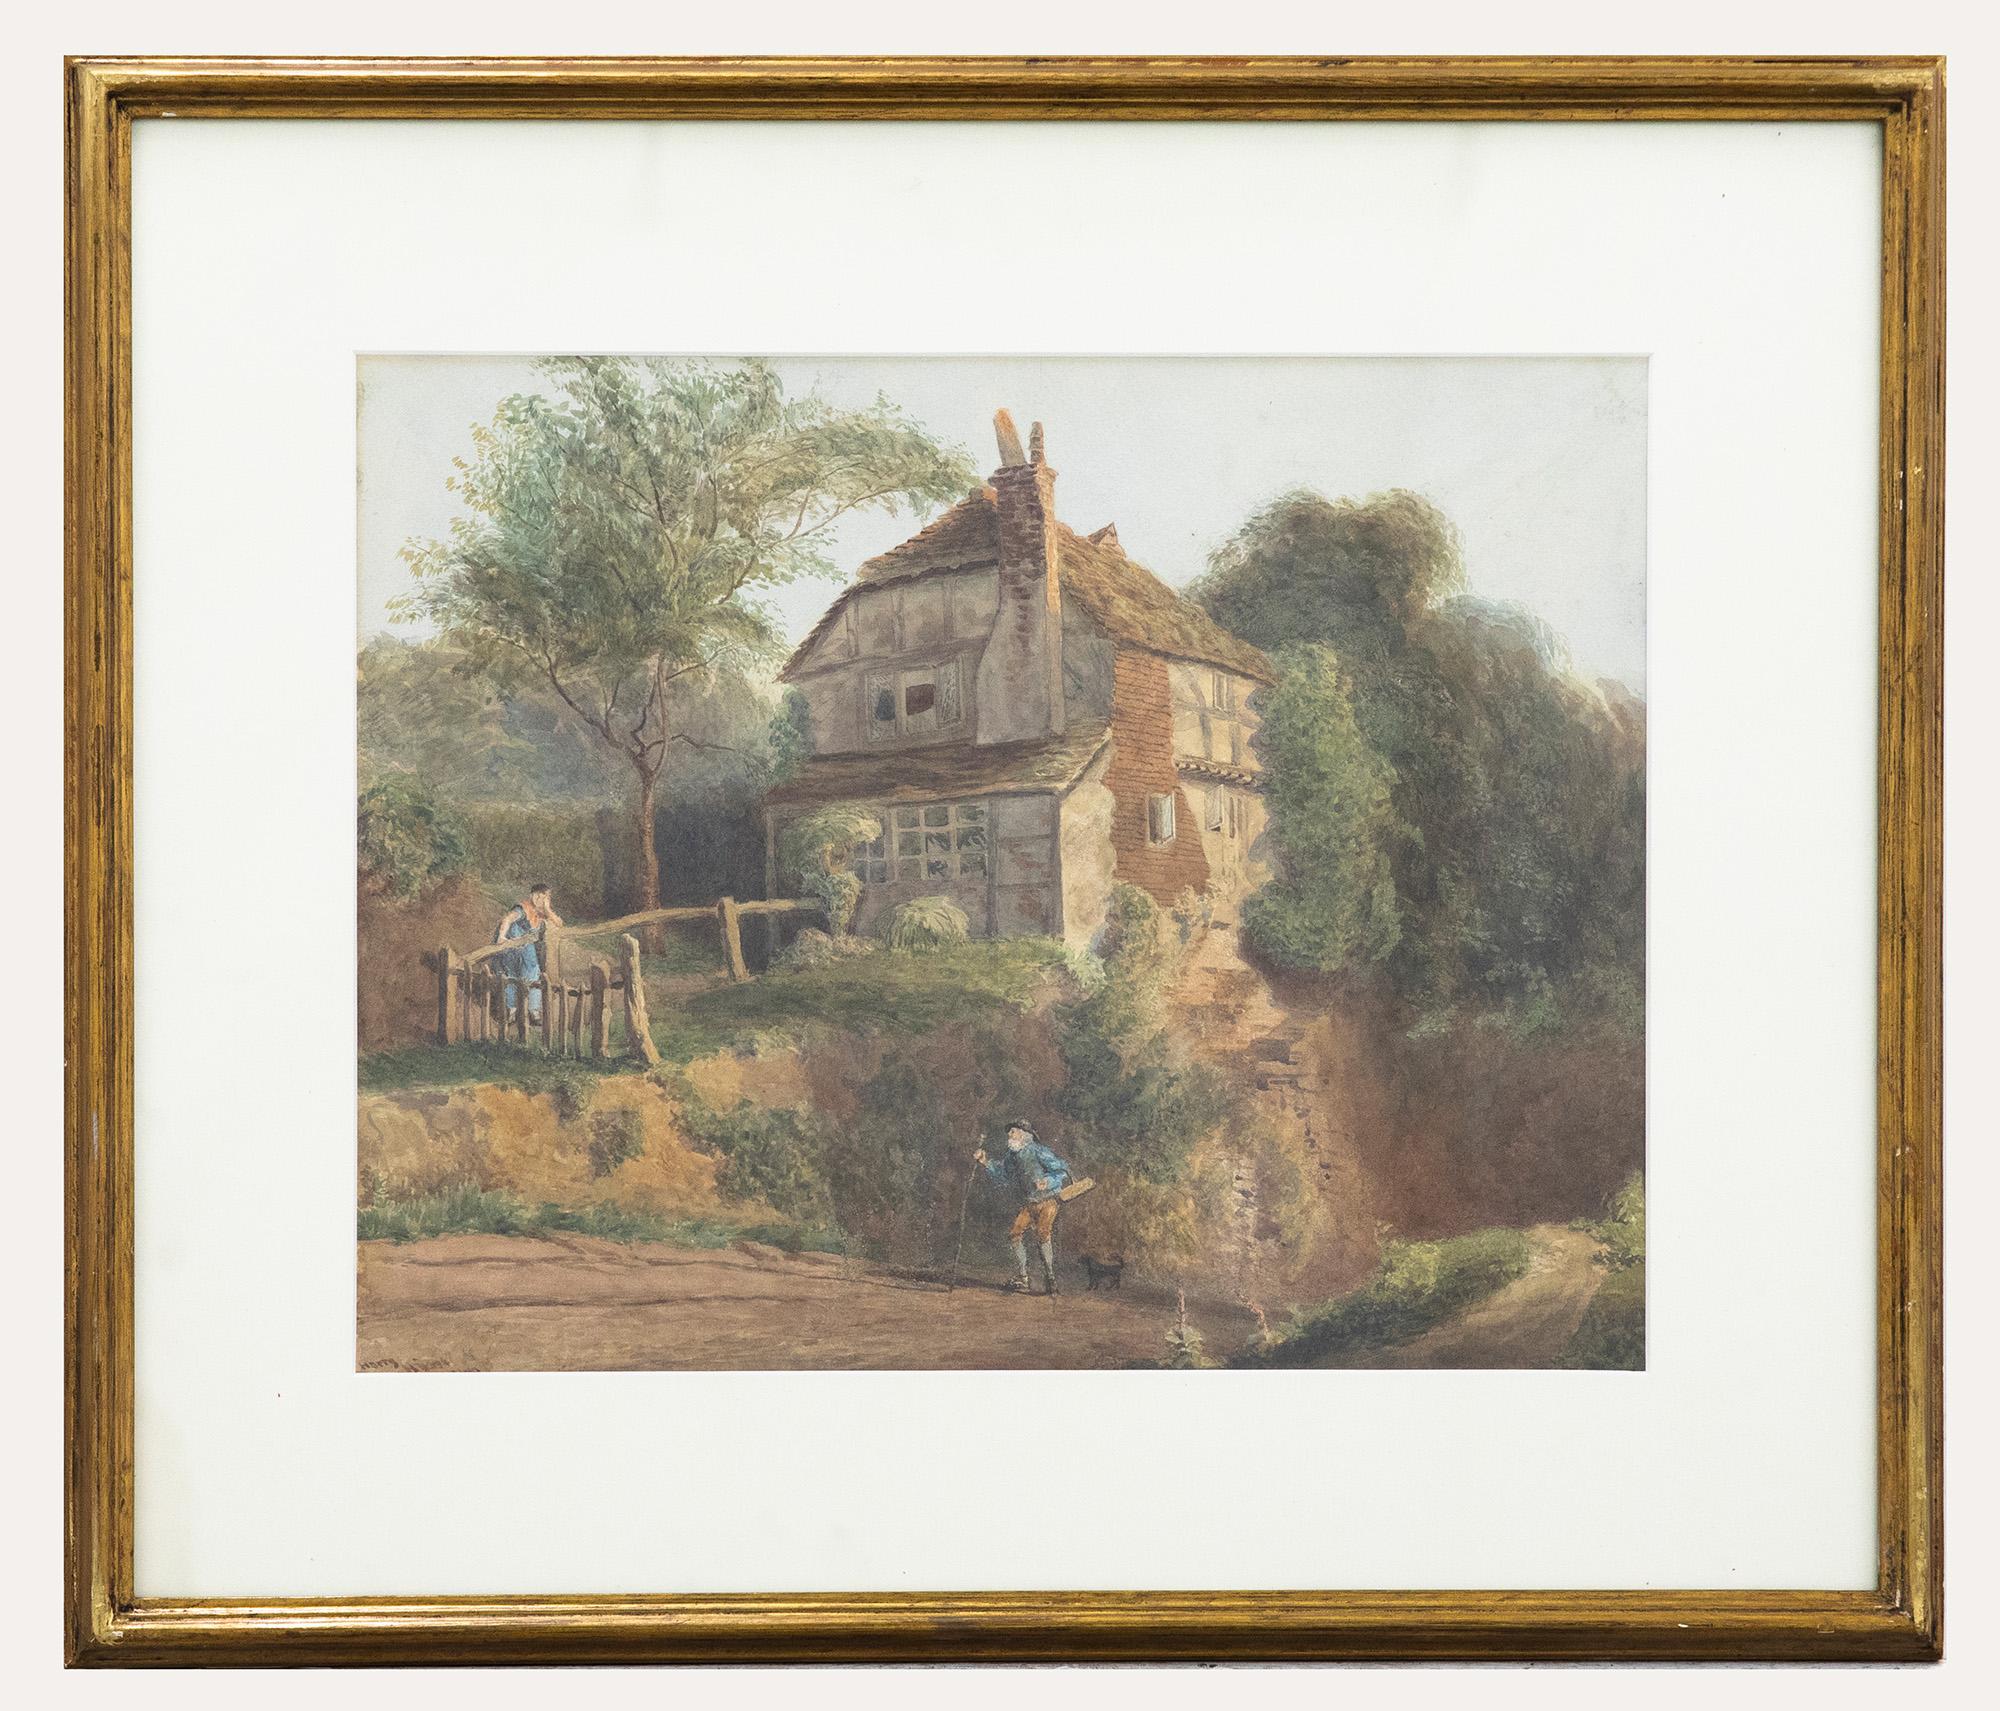 This humorous watercolour by Henry George Hine R.I (1811-1895), depicts an elderly gentleman returning home to his displeased wife. The gentleman looks jolly in his step before noticing his other half resting in frustration on the cottage fence.